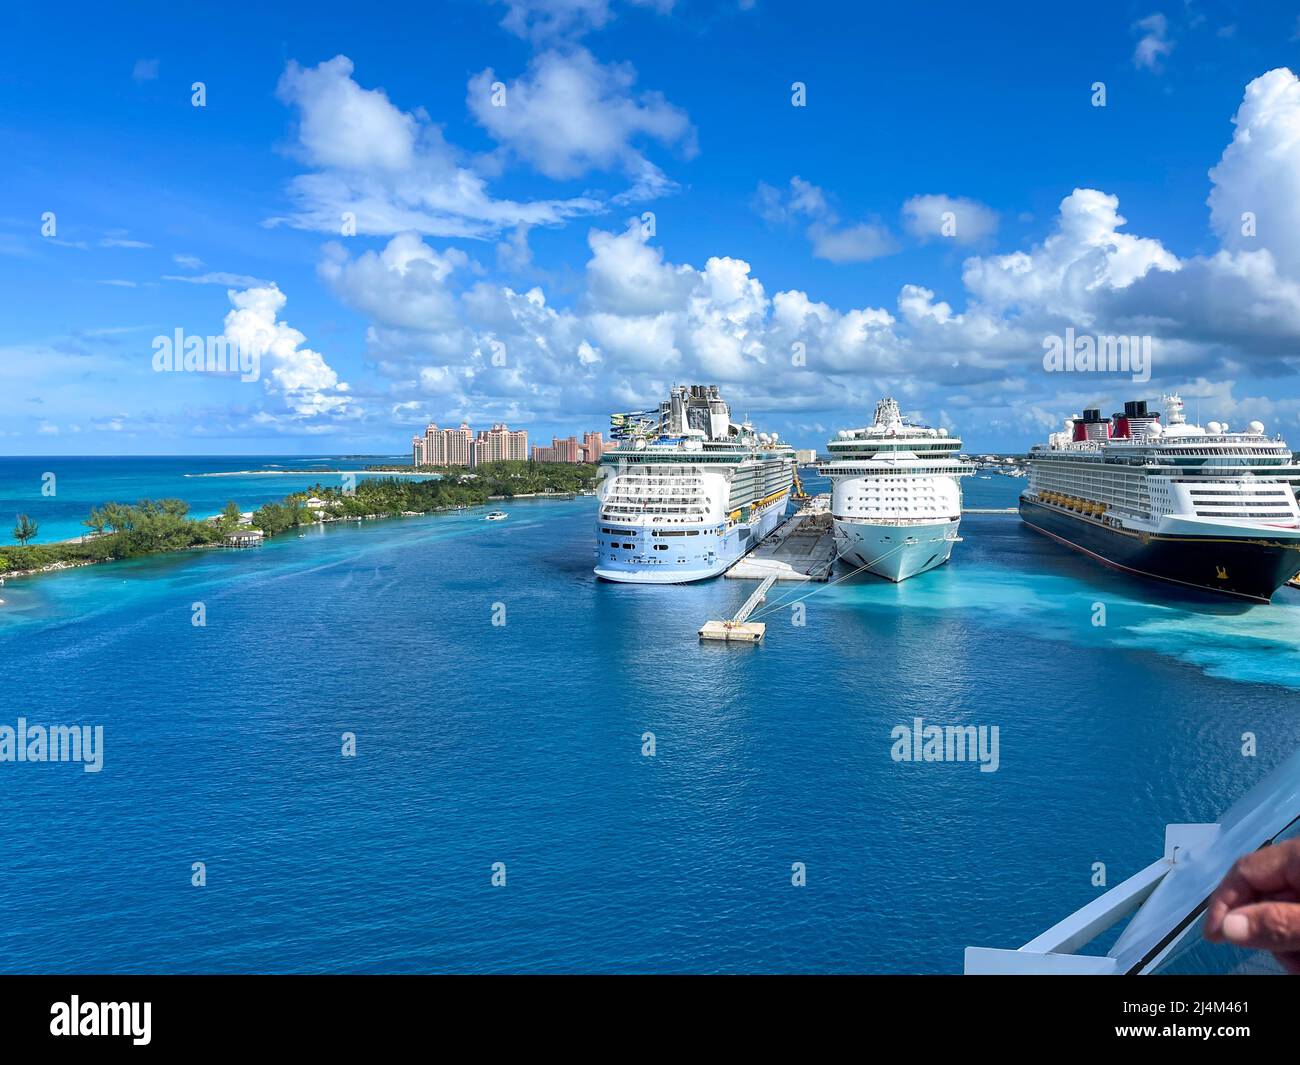 Nassau, Bahamas - October 13, 2021: An aerial view of the cruise ship harbor in Nassau, Bahamas from a cruise ship that is sailing away. Stock Photo